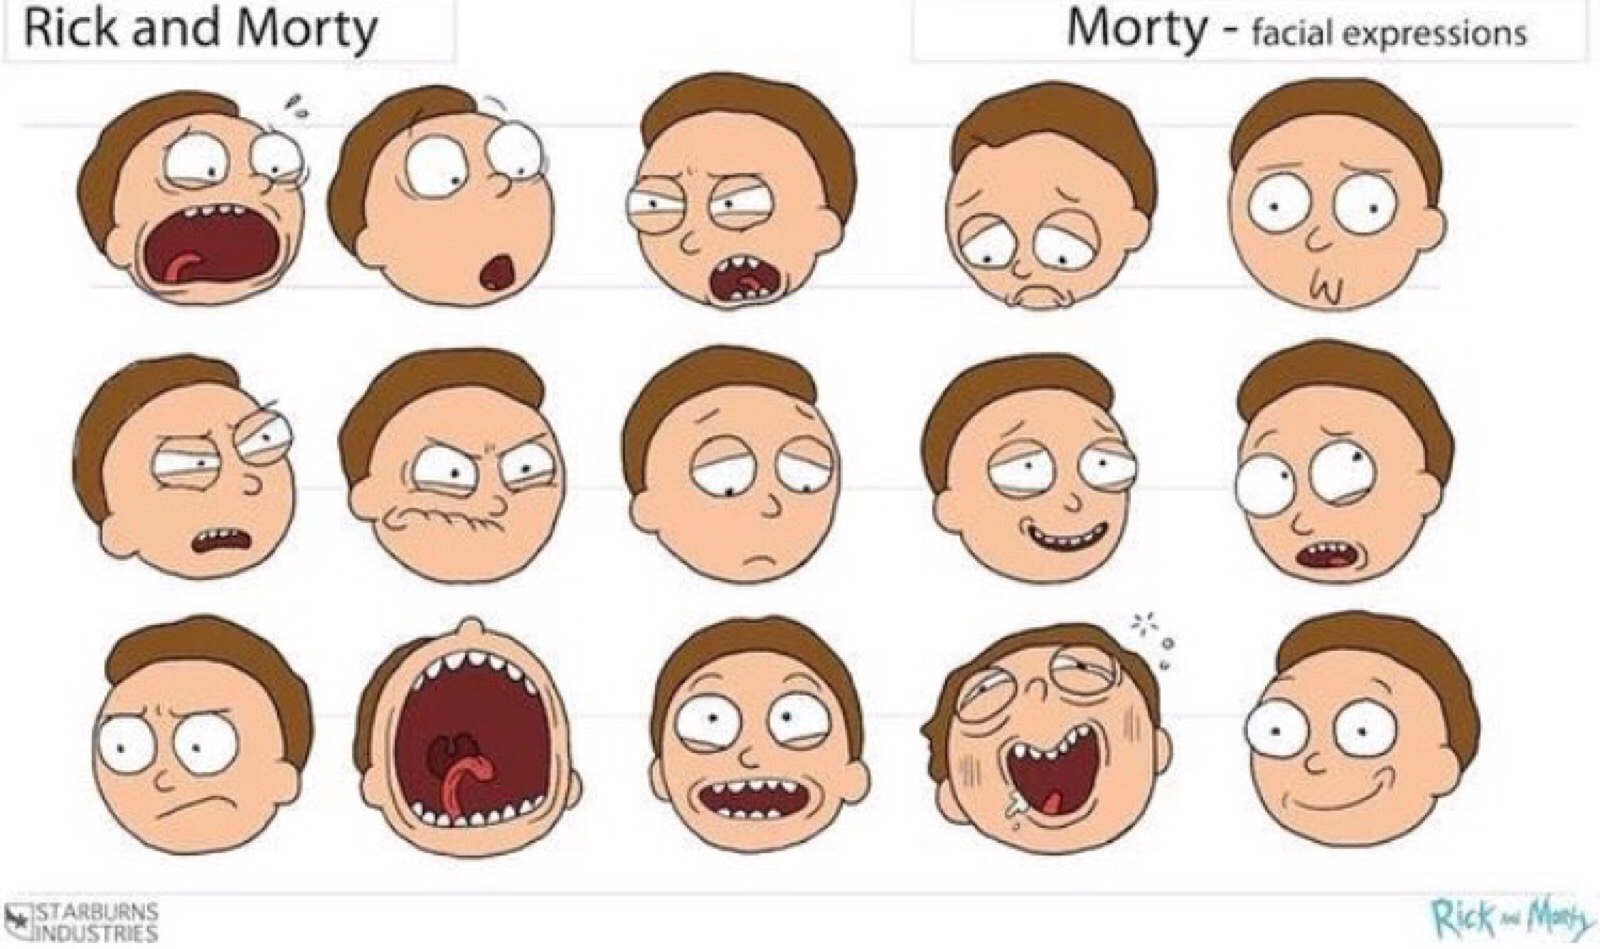 rick and morty via:ins rockandmorty.offical